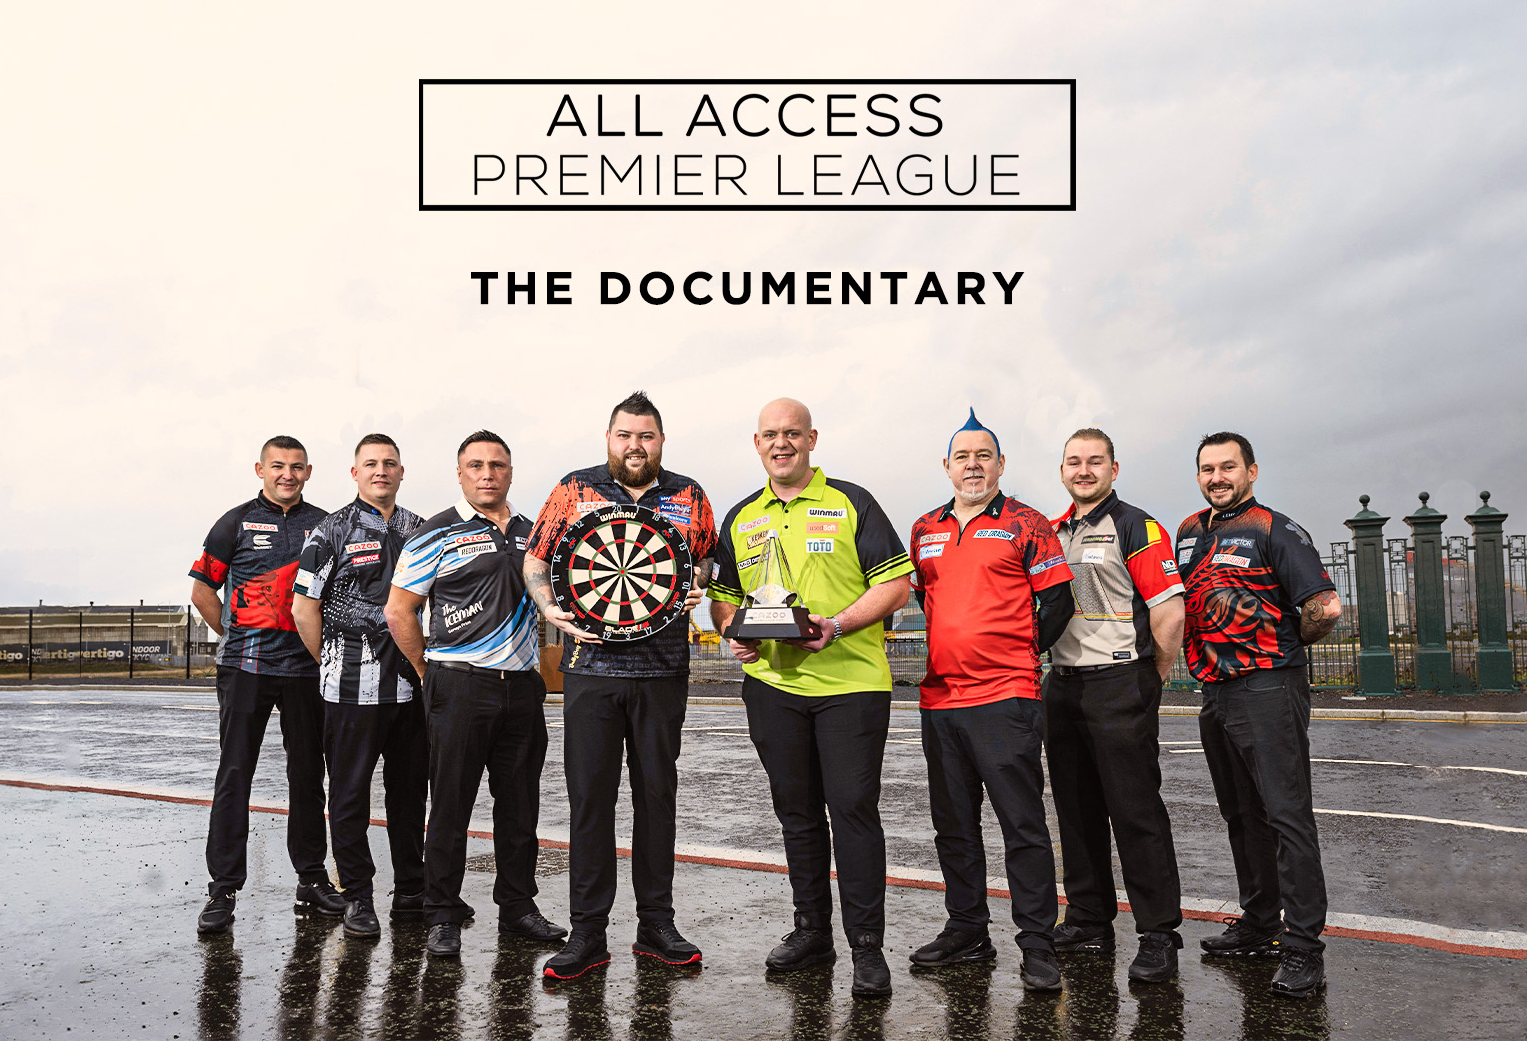 All Access Premier League The Documentary airs from Thursday PDC